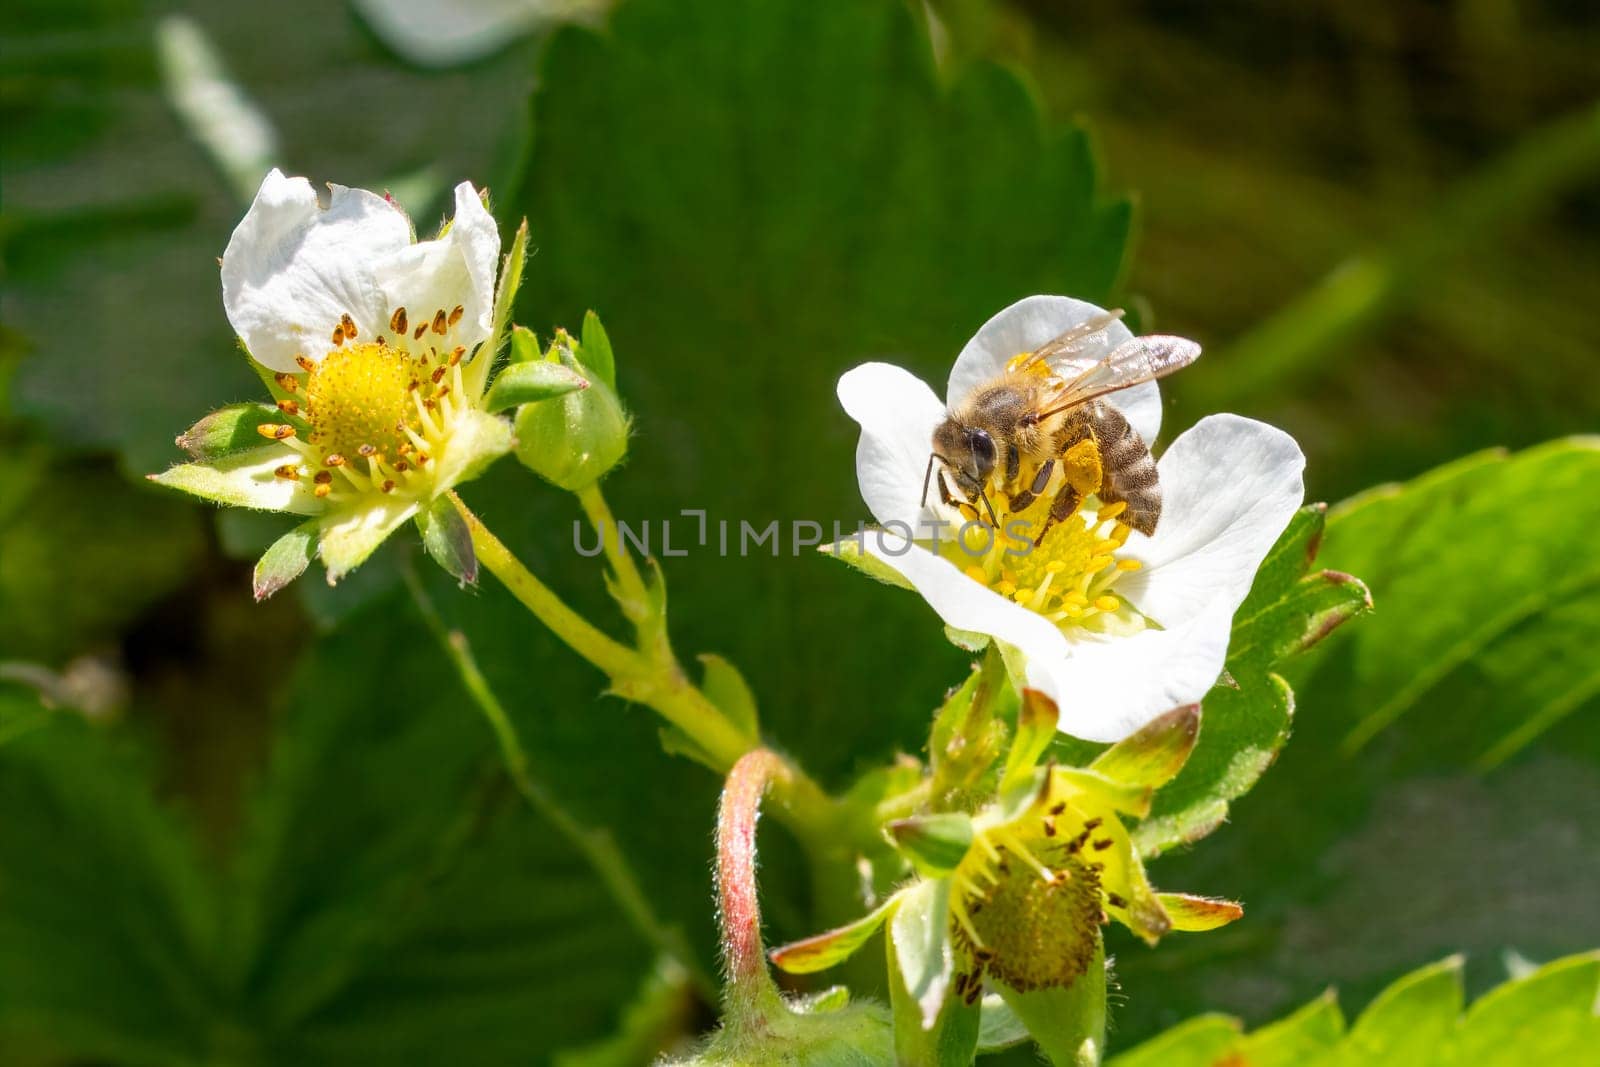 Flowering strawberry bush with a bee in the garden. by mvg6894